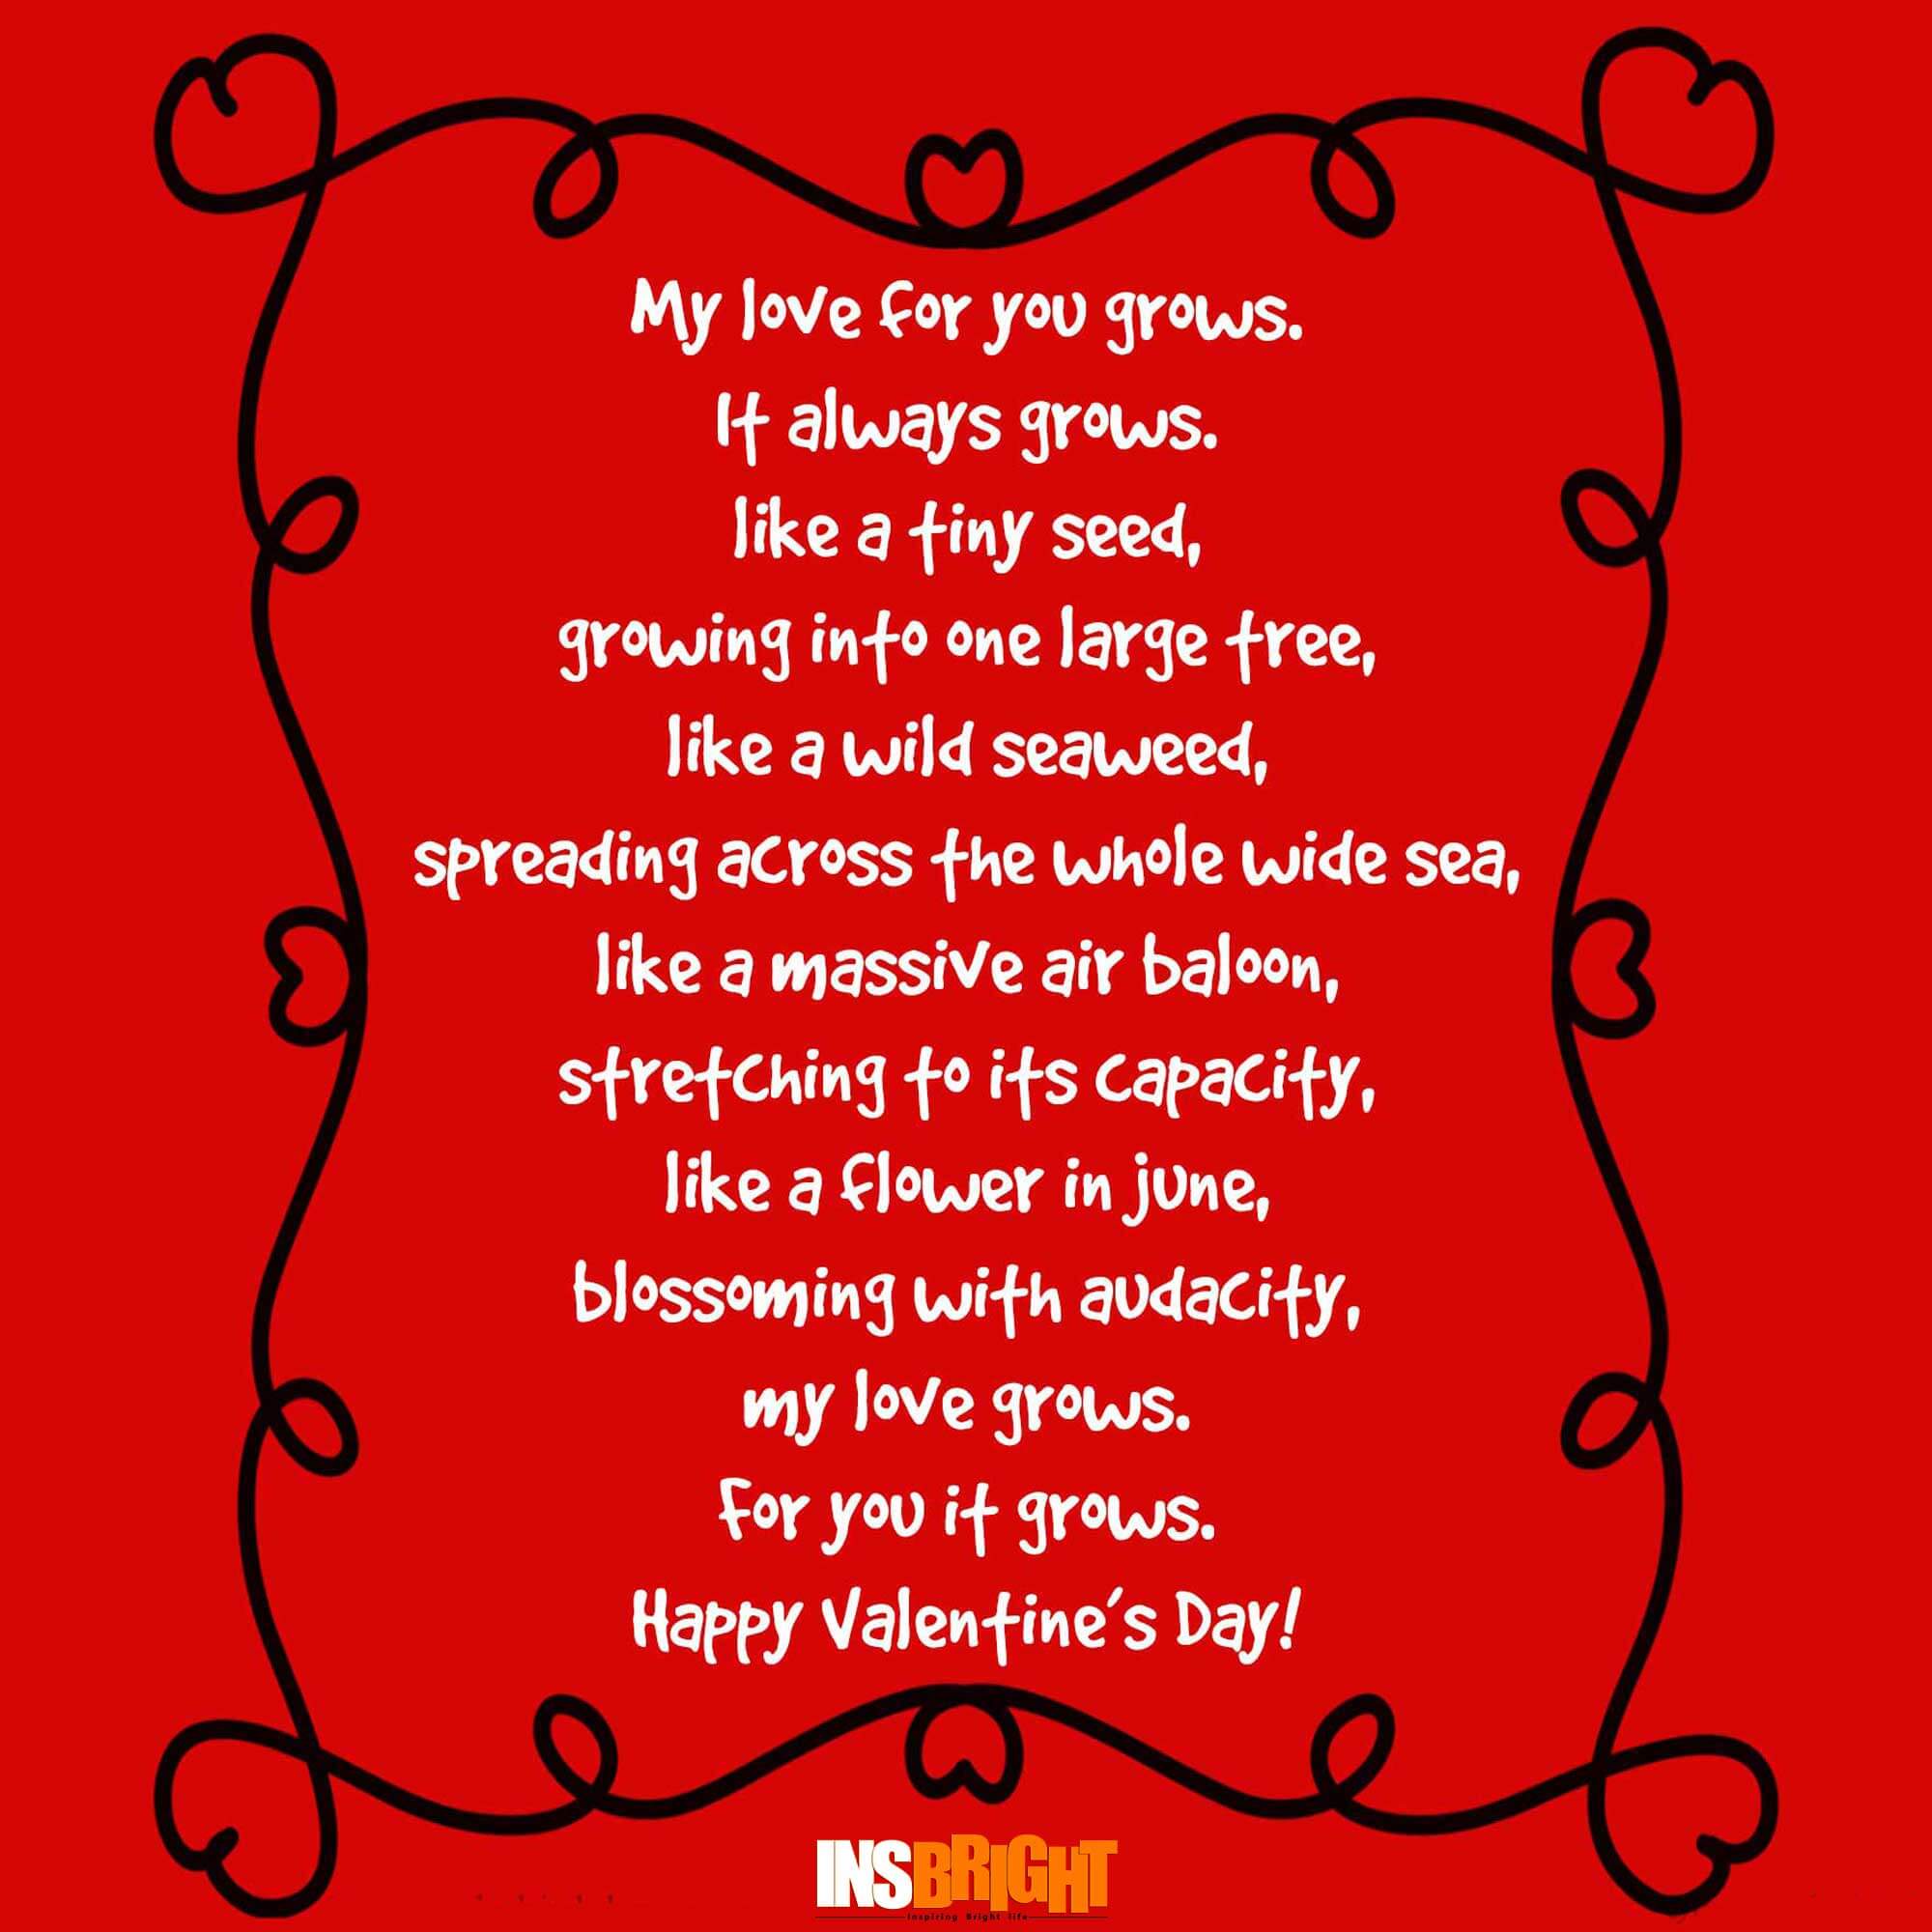 Happy Valentine's Day Poems For Him or Her With Images 2017